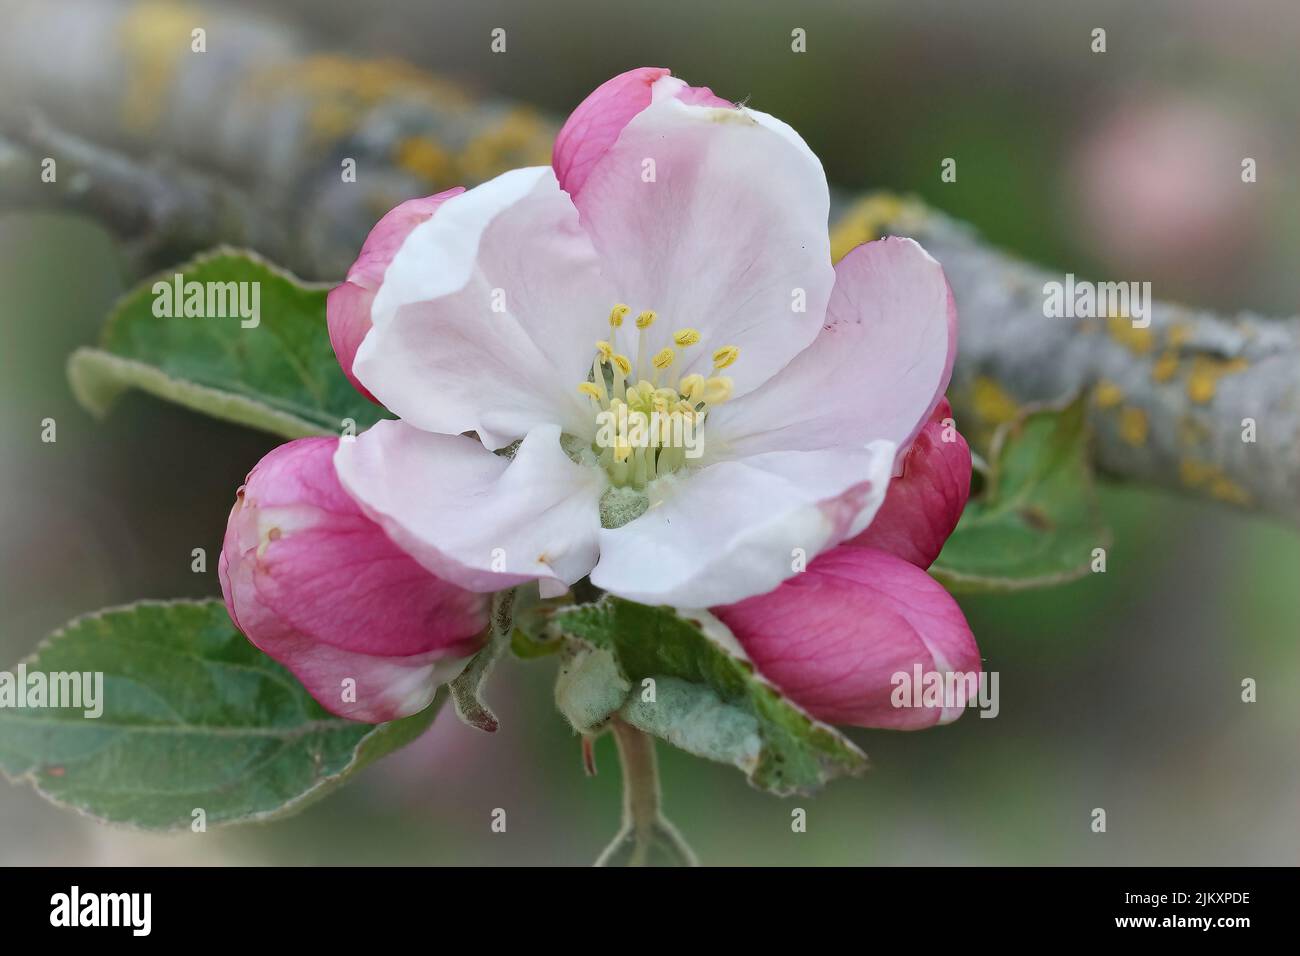 Closeup on the colorful pink and white blossoming European crab apple, Malus sylvestris Stock Photo